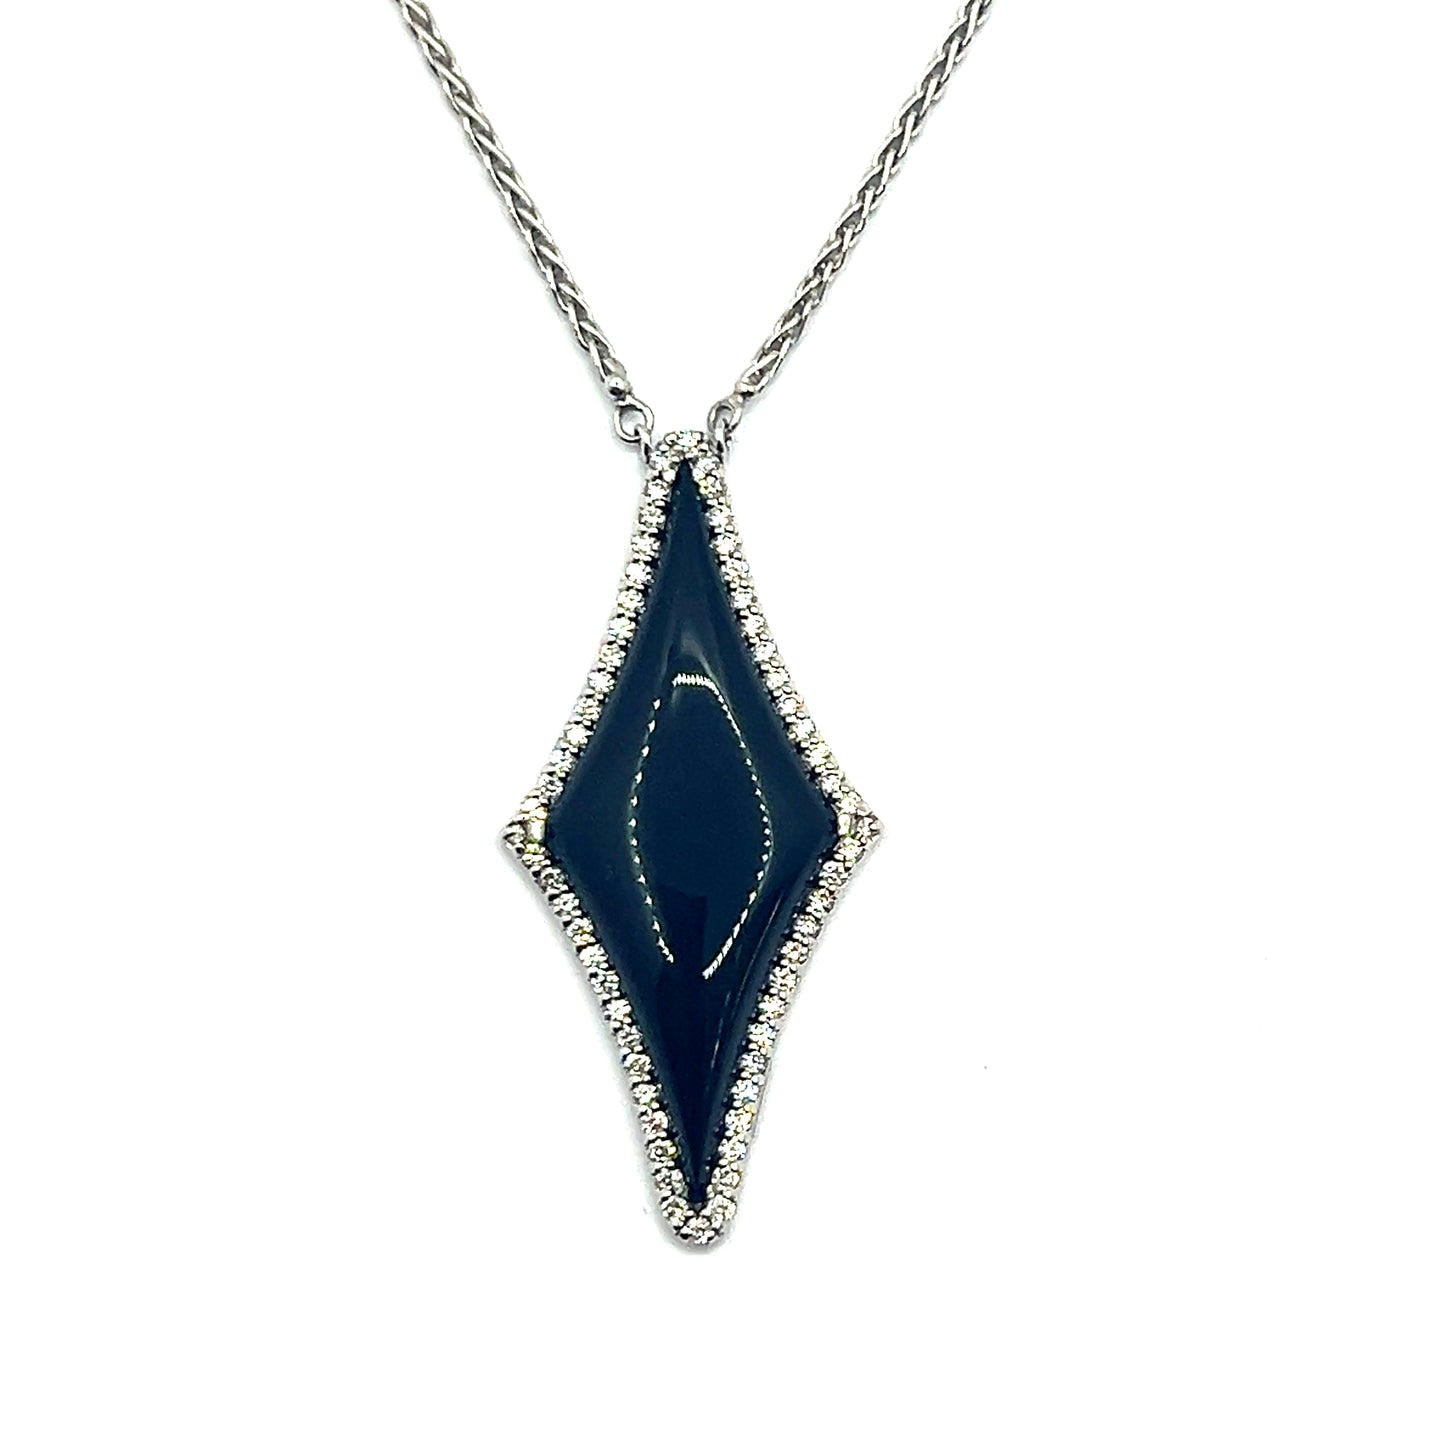 18ct White Gold Onyx and Diamond Pendant Necklace